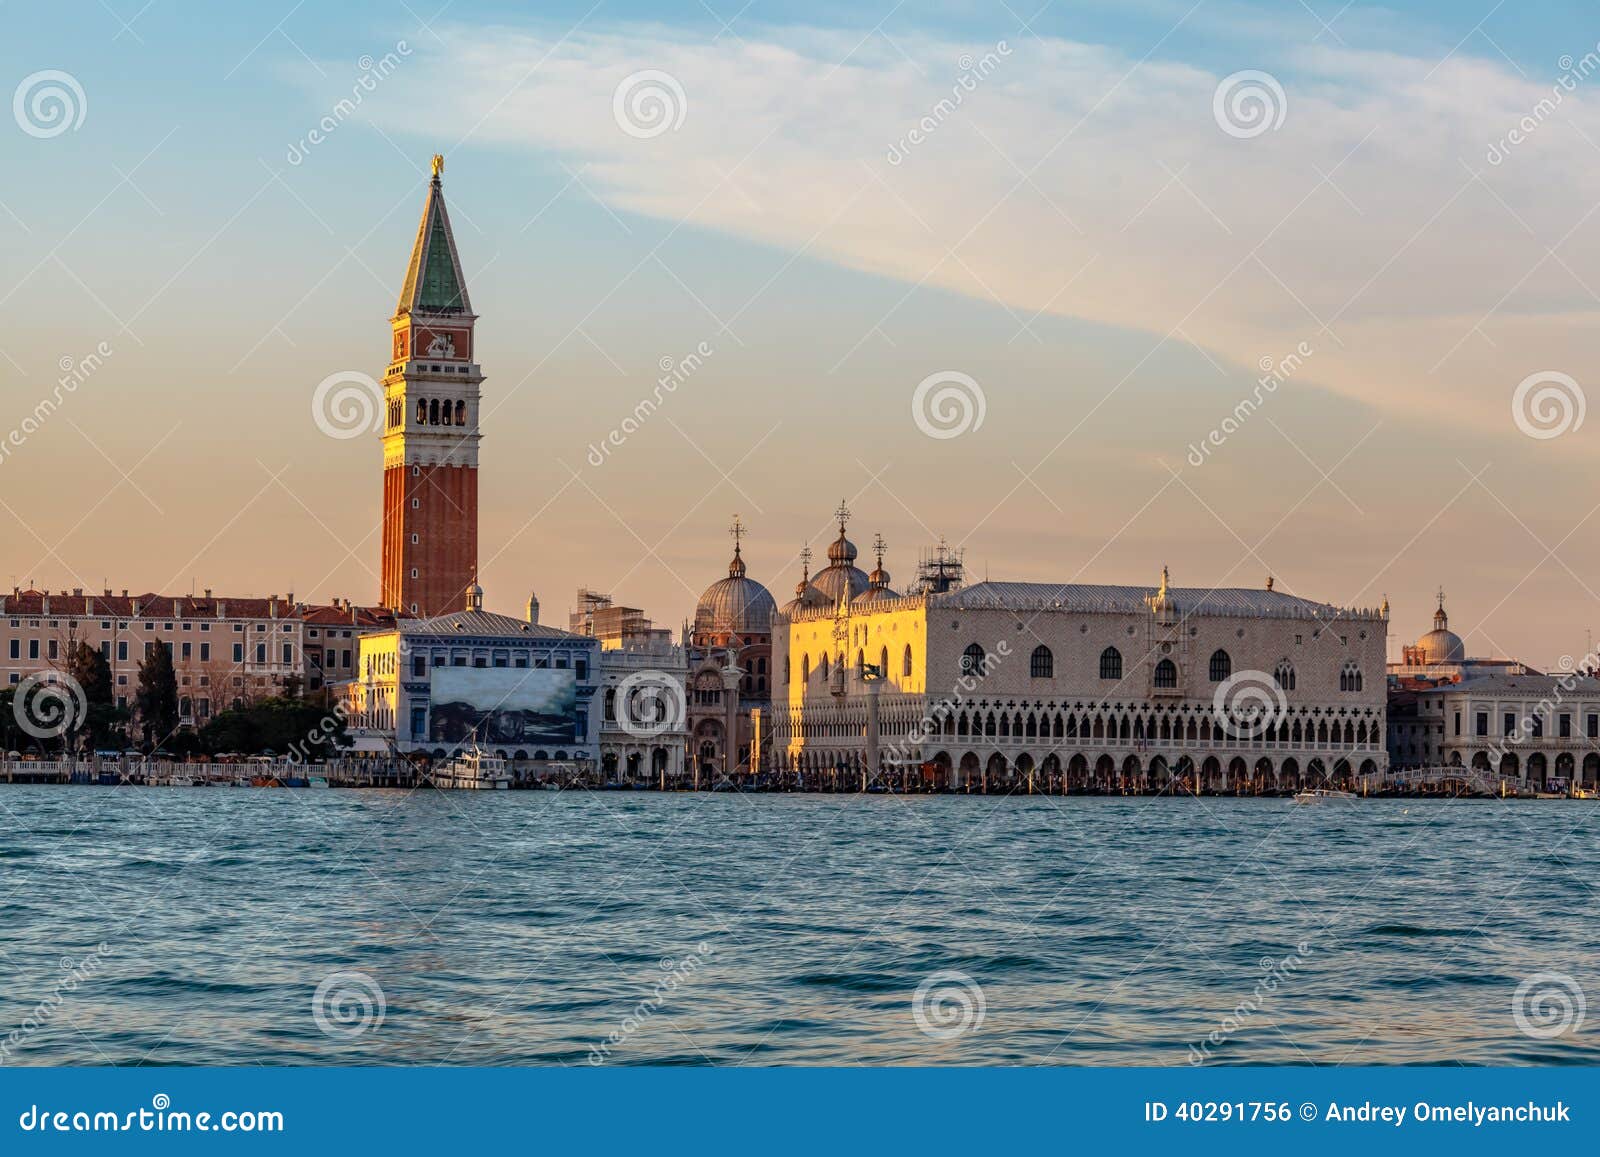 view of doge's palace, campanella and san marco cathedral